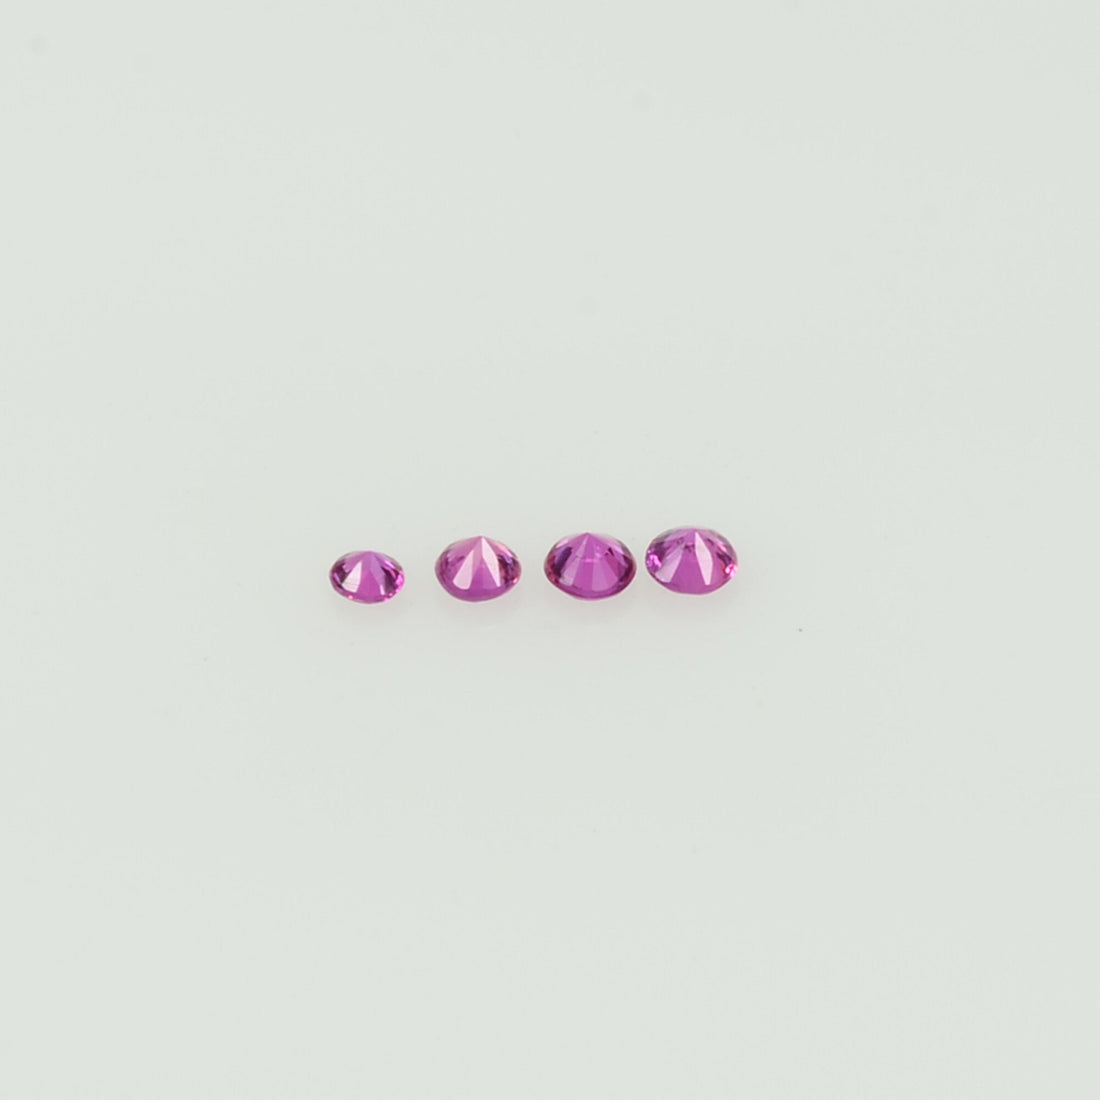 1.4-1.7 mm Natural Pink Sapphire Loose Gemstone Round Diamond Cut Cleanish Quality AAA Color